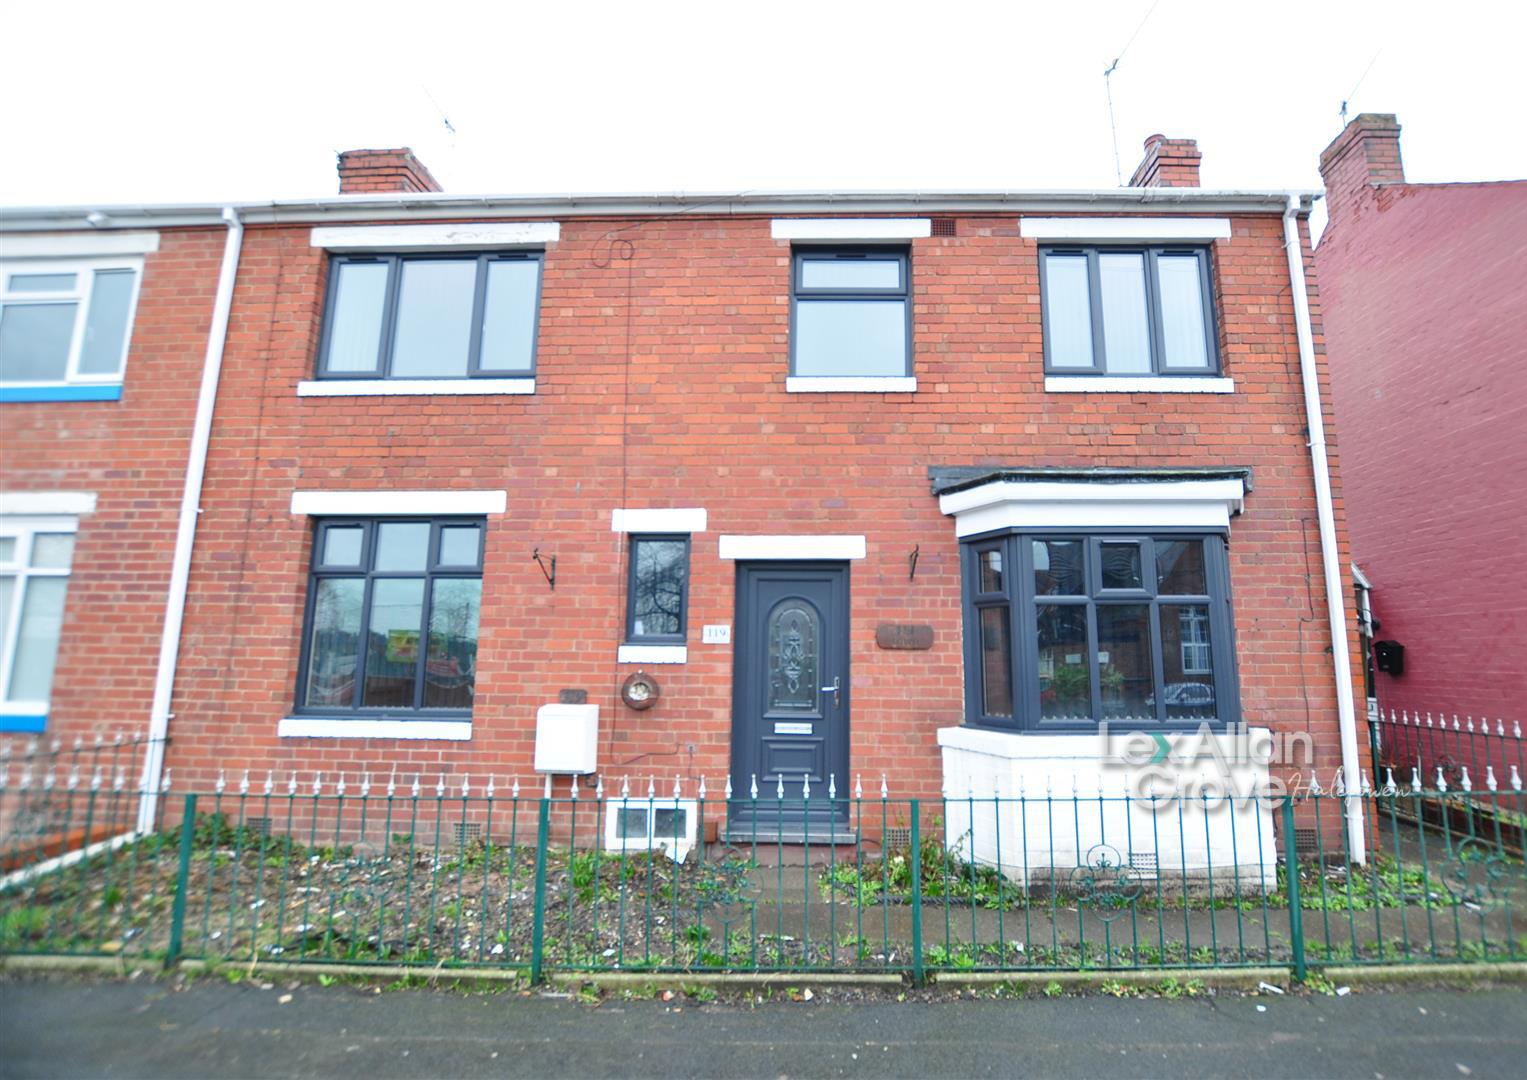 3 bed semi-detached house for sale in Wrights Lane, Cradley Heath, B64 